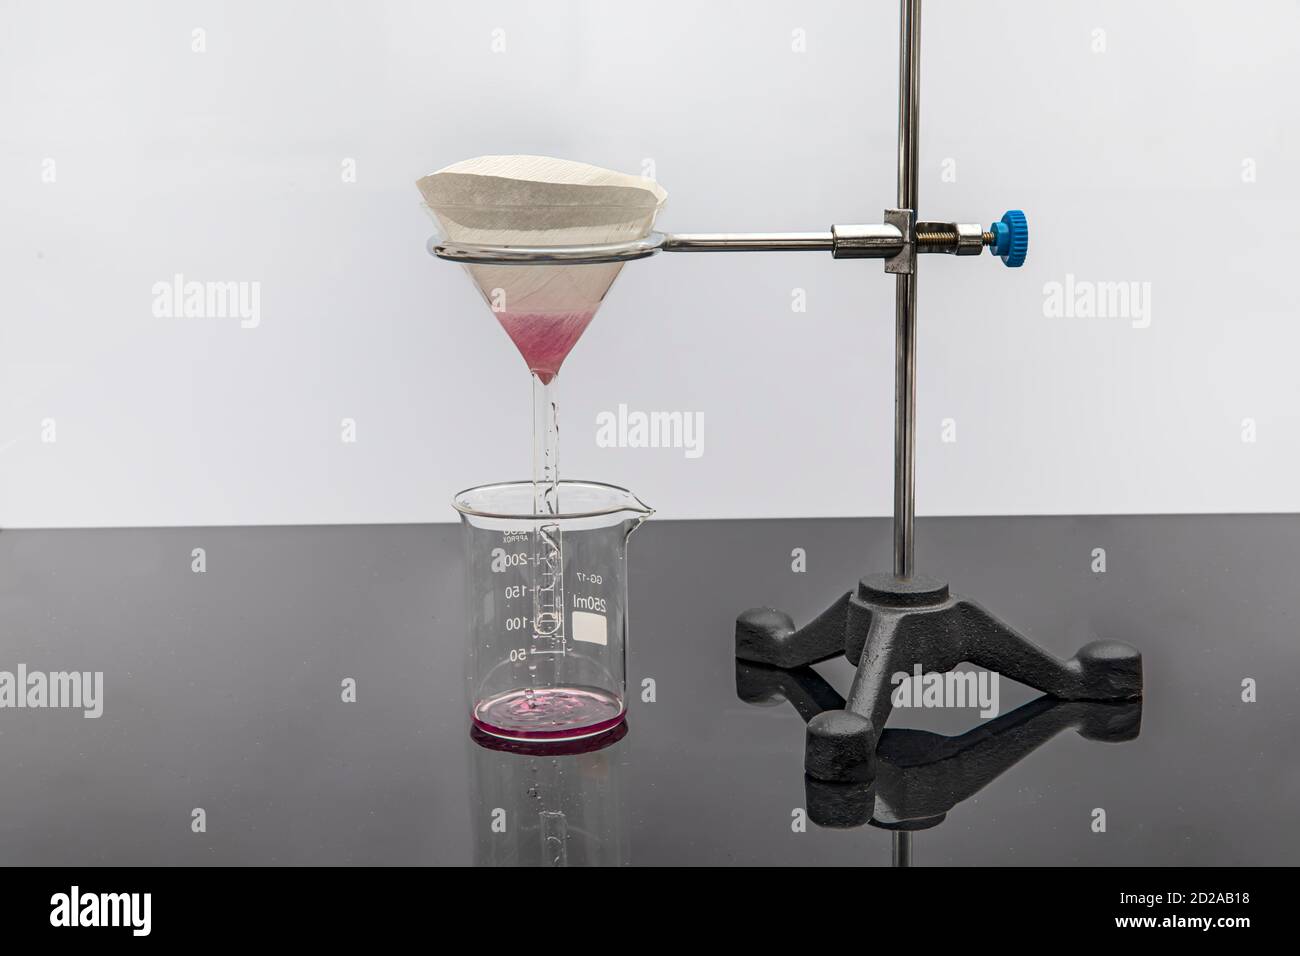 https://c8.alamy.com/comp/2D2AB18/filter-paper-in-laboratory-scientists-are-chemical-filtration-by-filtering-through-filter-paper-in-a-glass-funnel-close-up-2D2AB18.jpg